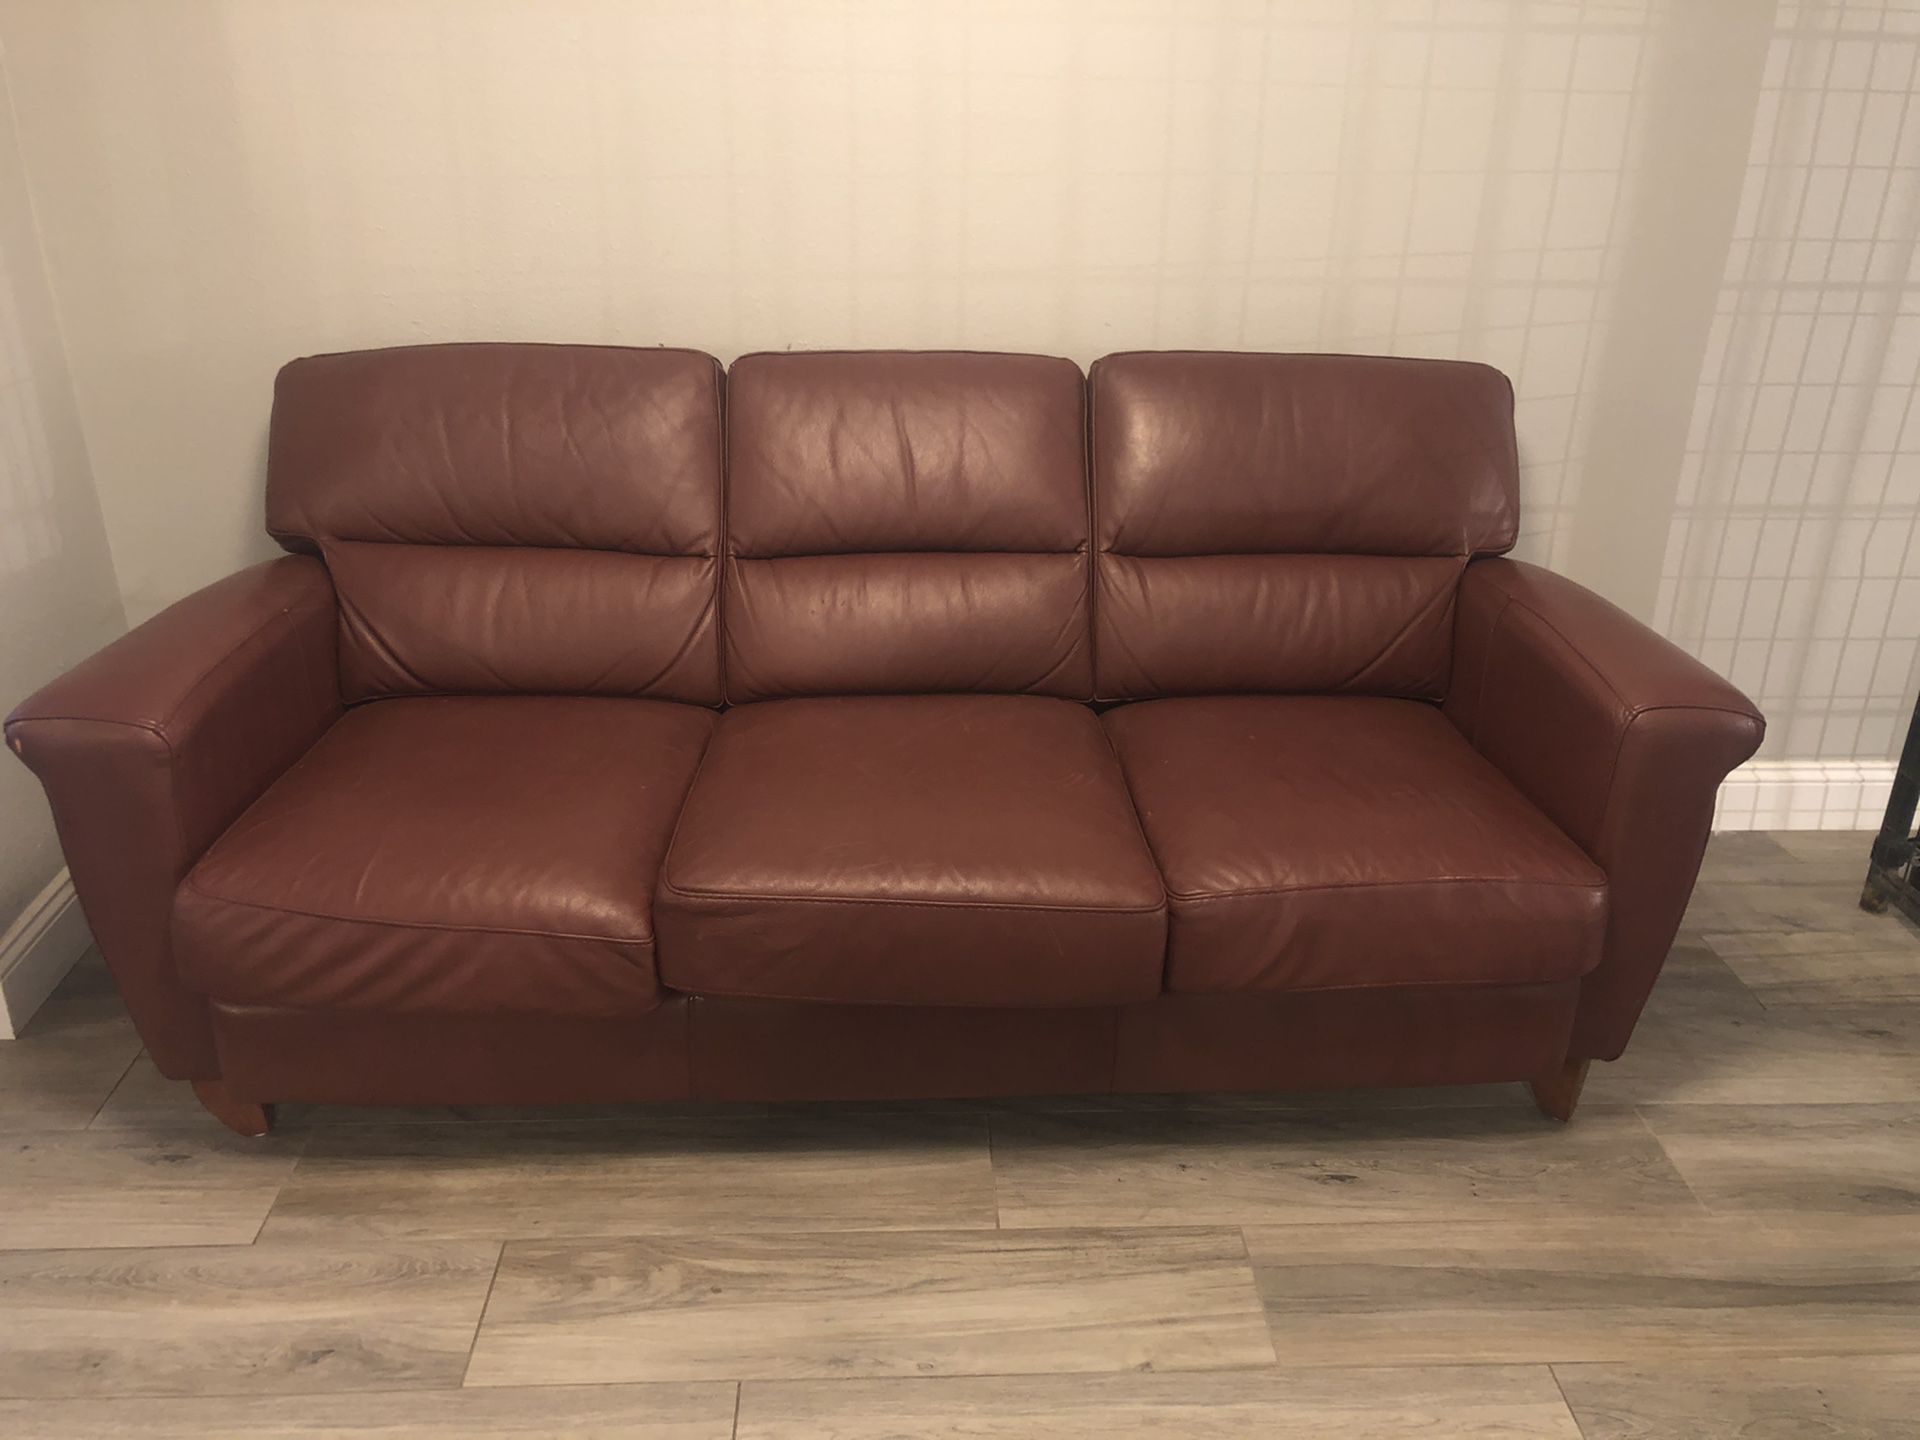 Sofa and Chair Red or Maroon Leather W/ Ottoman Chaise